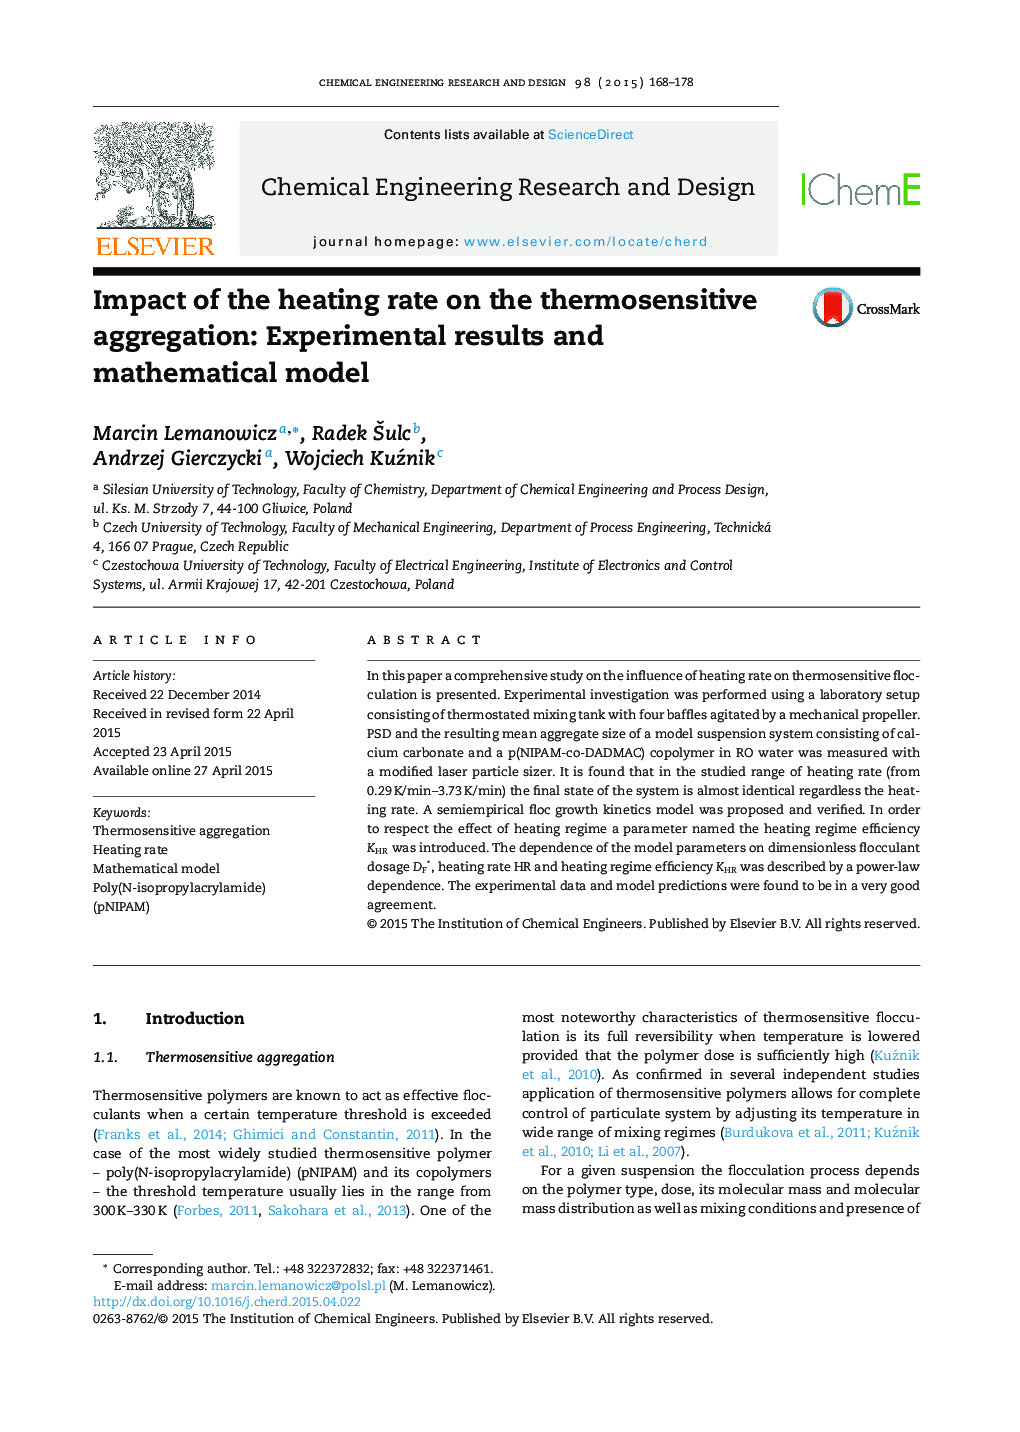 Impact of the heating rate on the thermosensitive aggregation: Experimental results and mathematical model